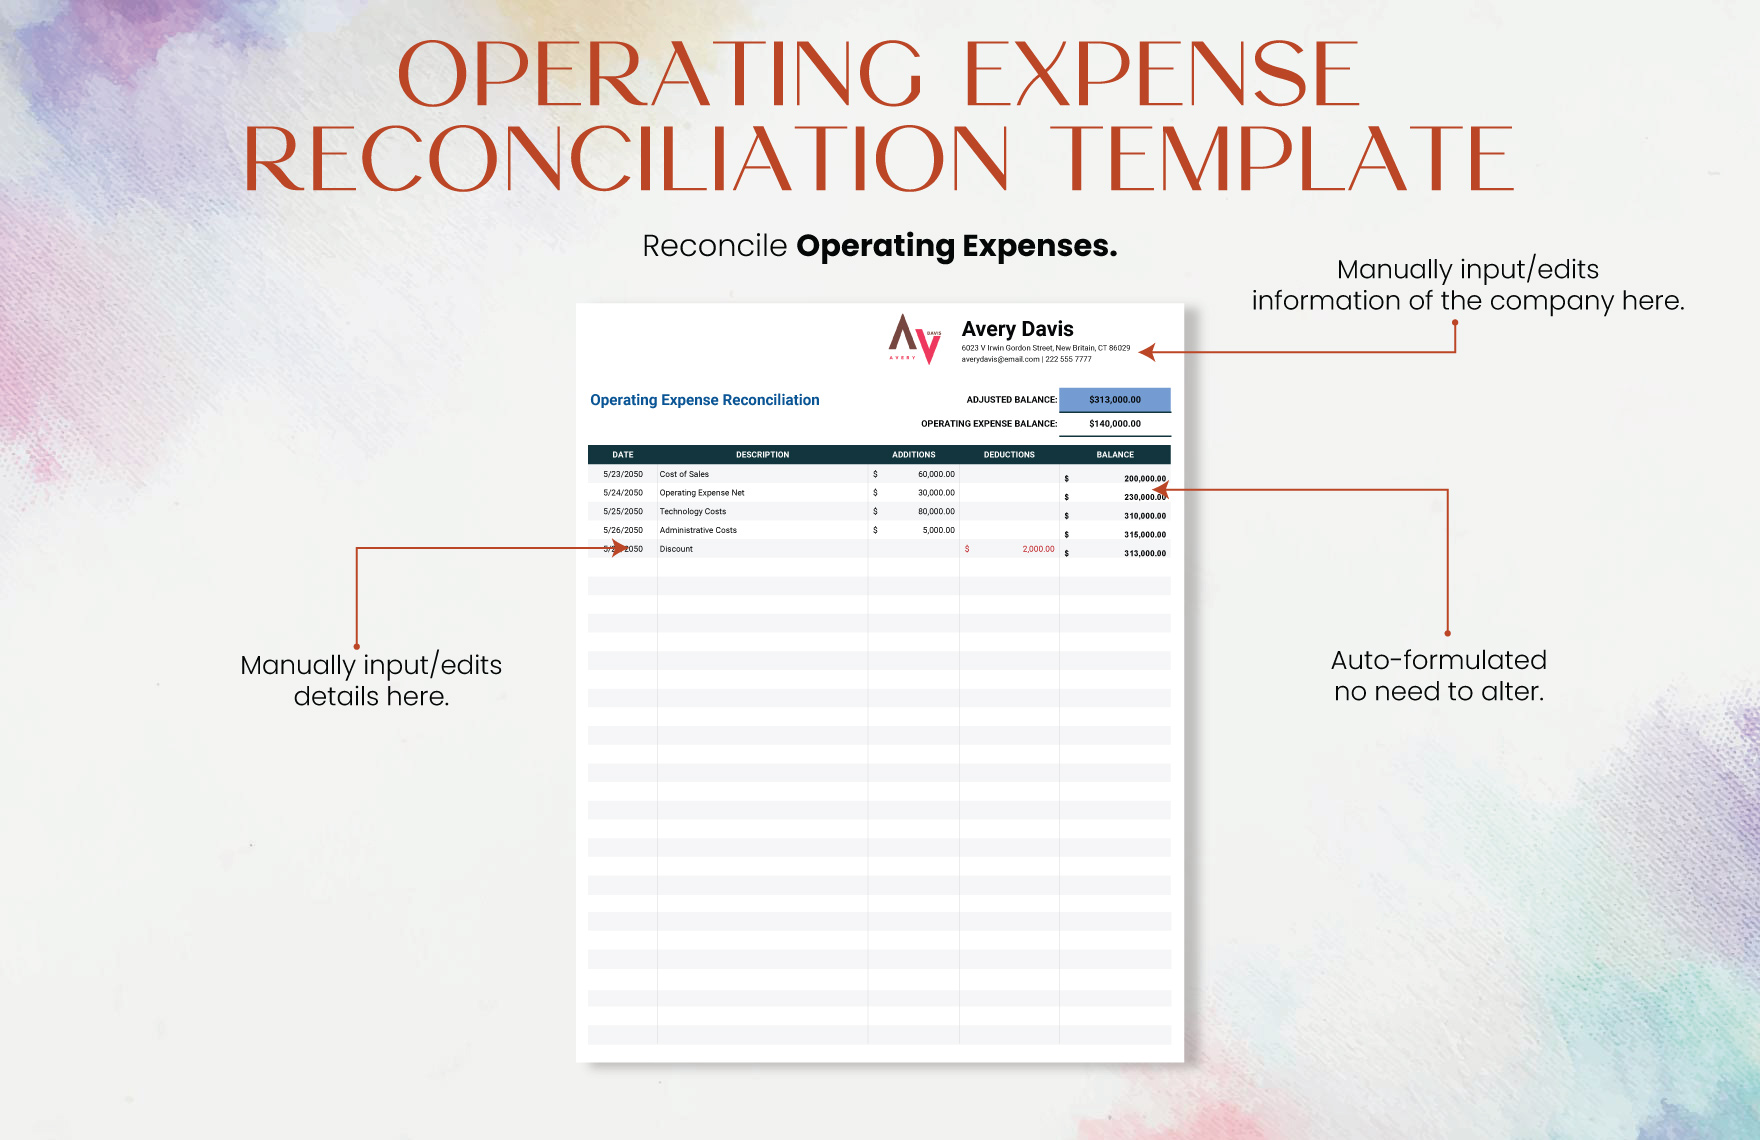 Operating Expense Reconciliation Template